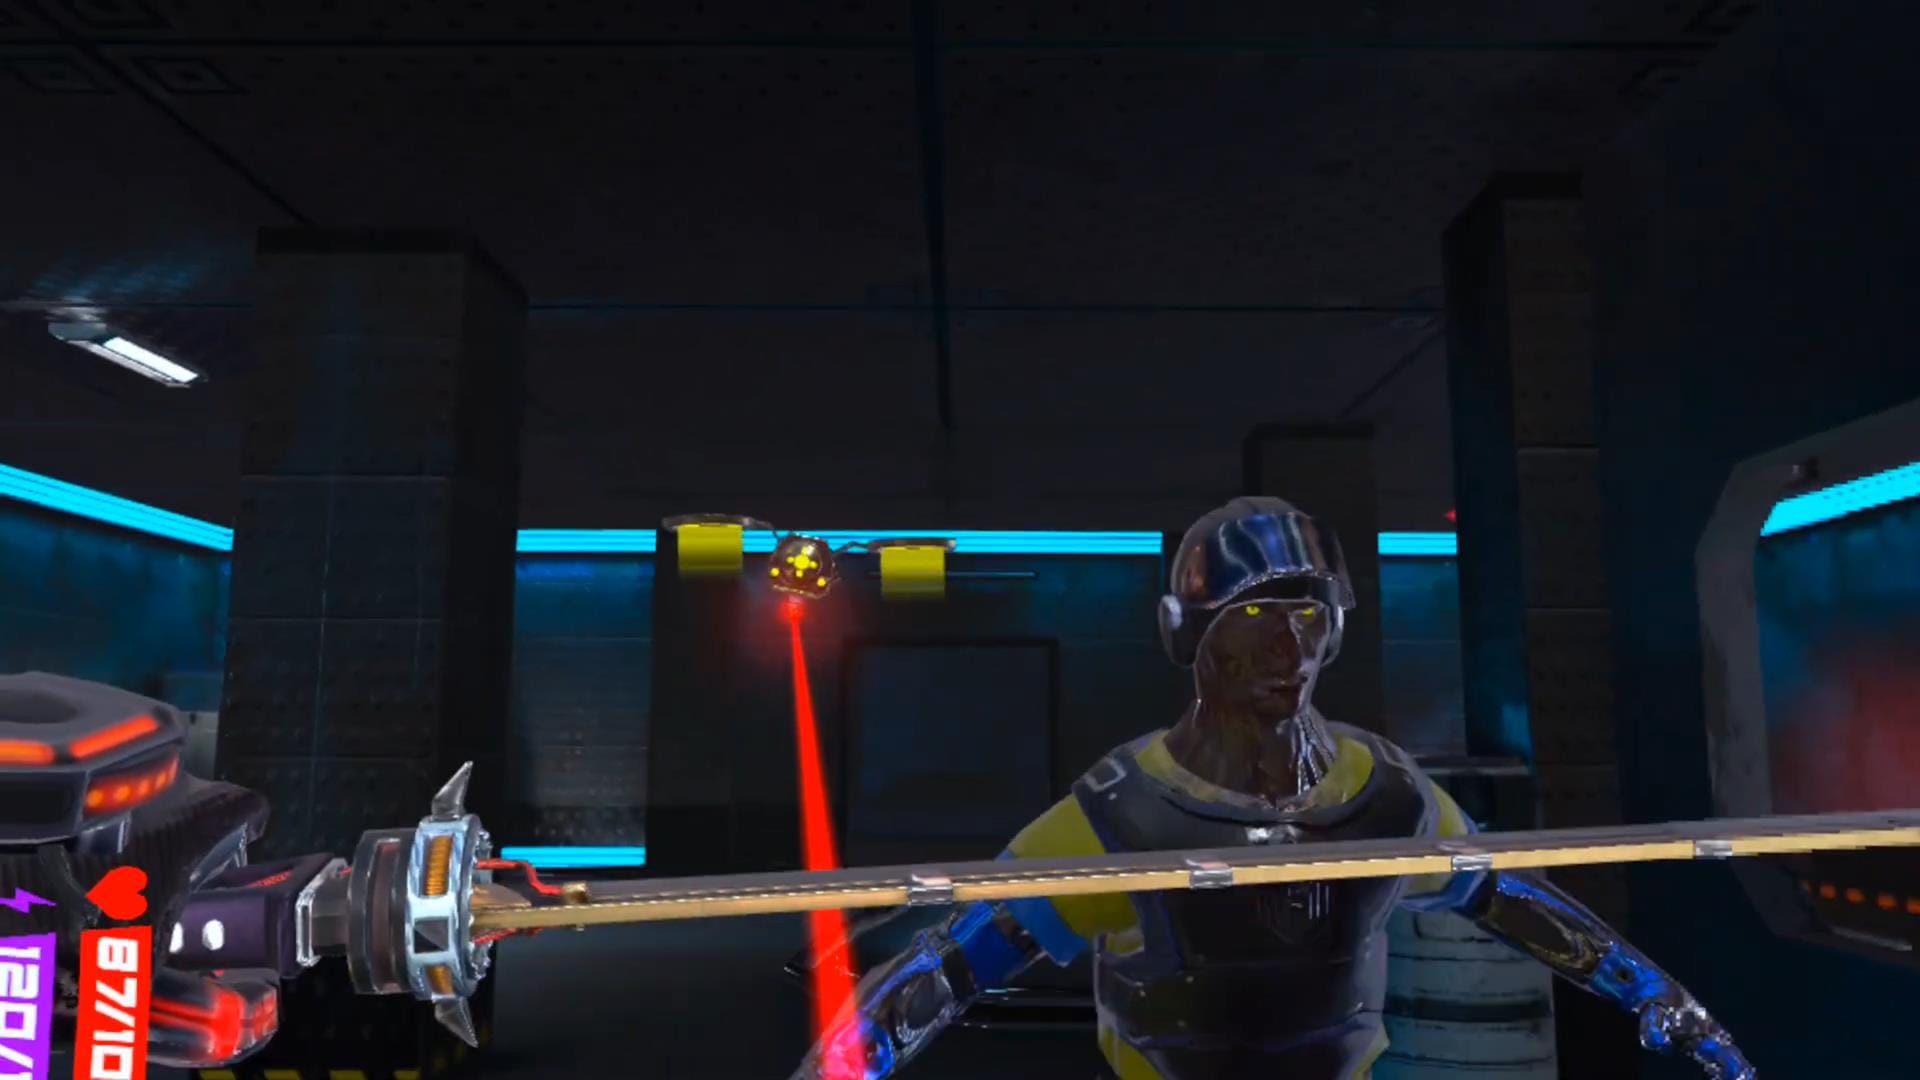 The player wields a katana against a brute zombie and a drone.